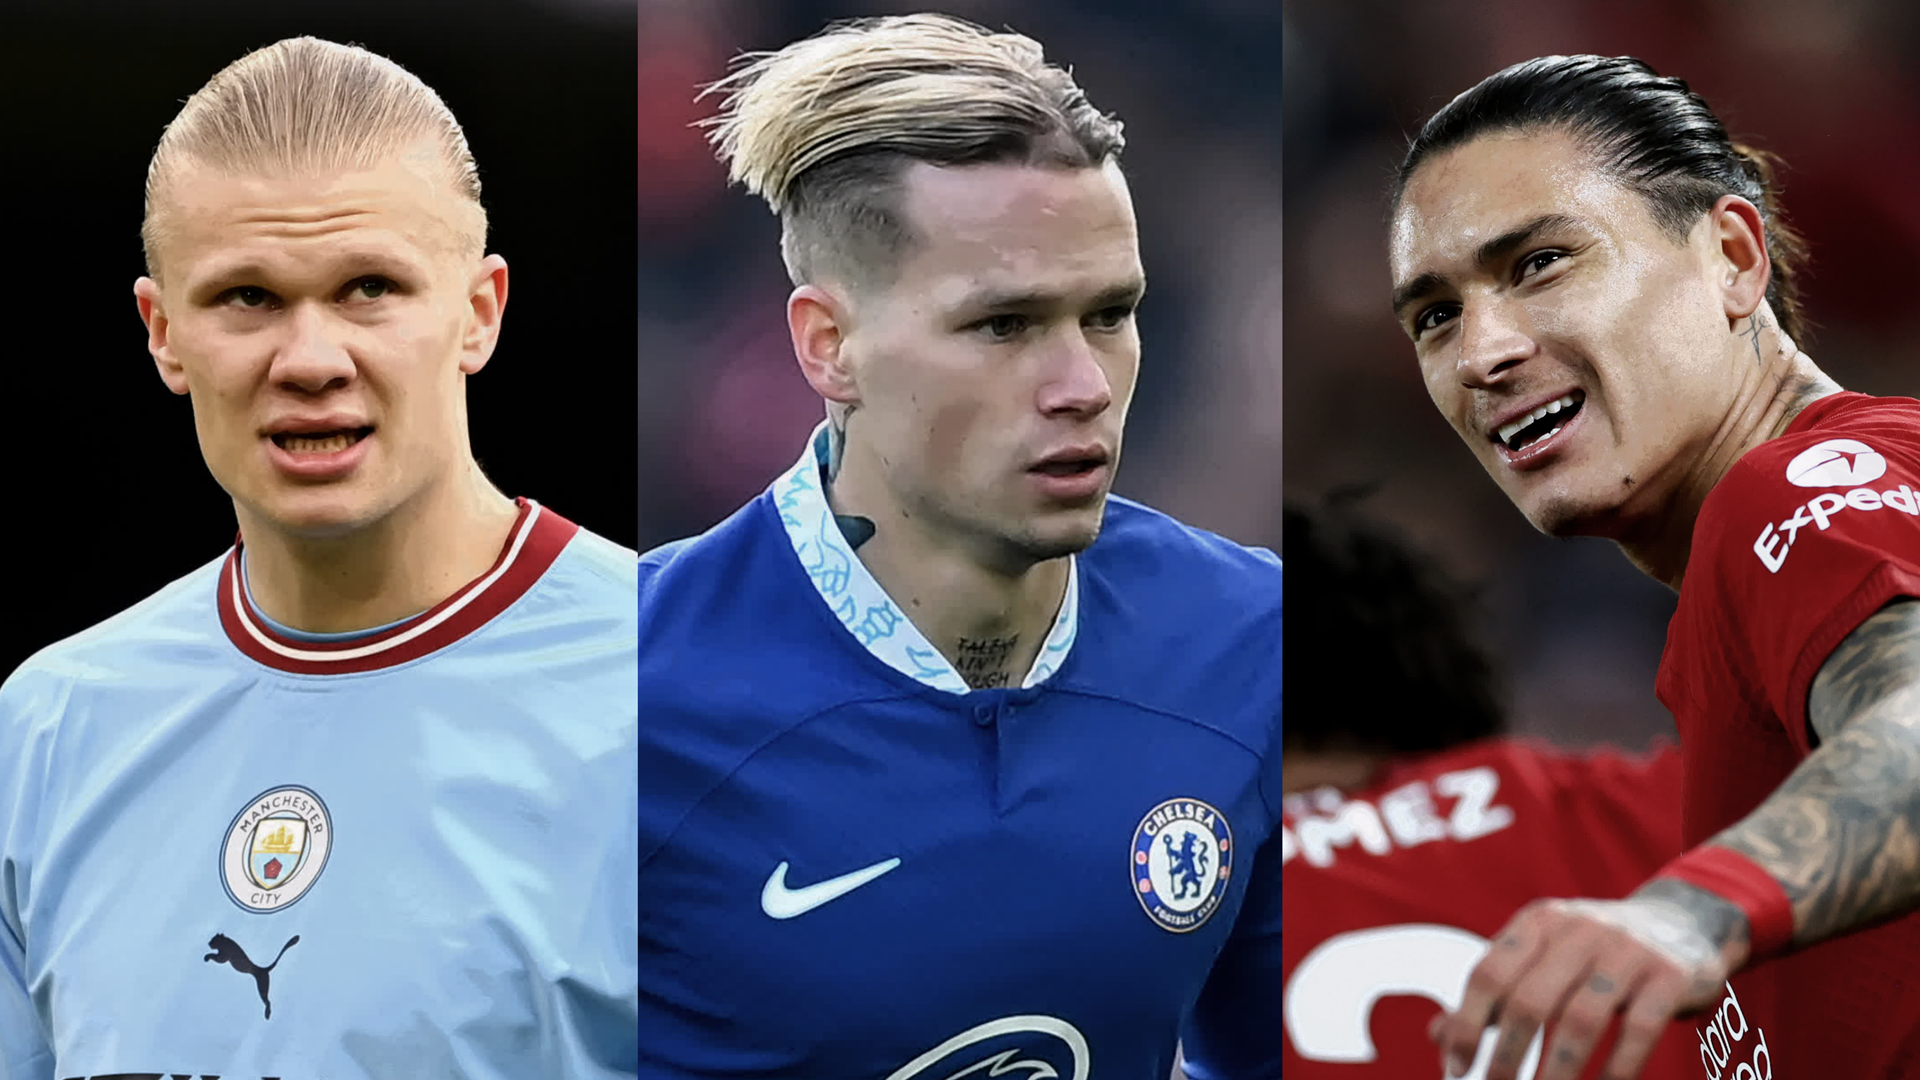 Who is the fastest player in the Premier League? US